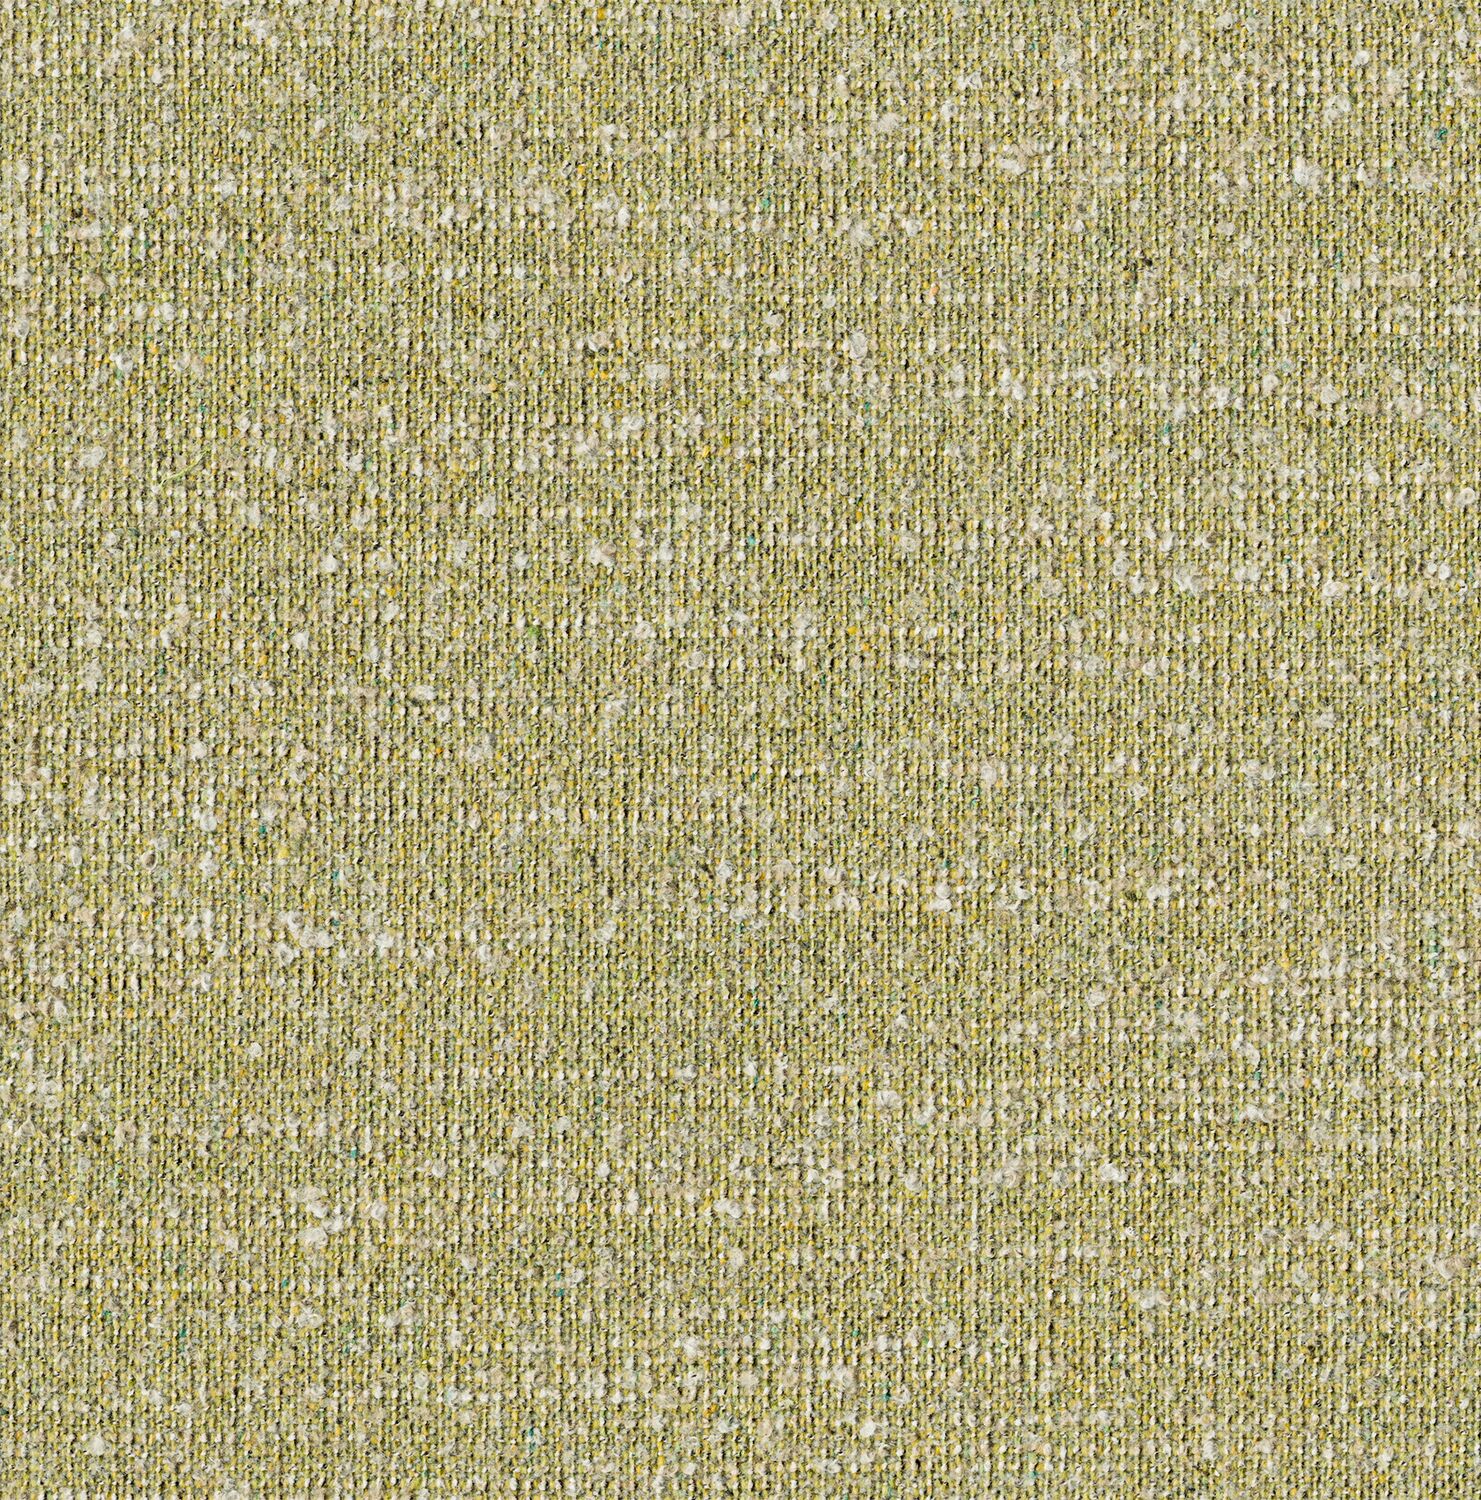 Everyday Boucle - Thicket - 4111 - 09 - Half Yard Tileable Swatches